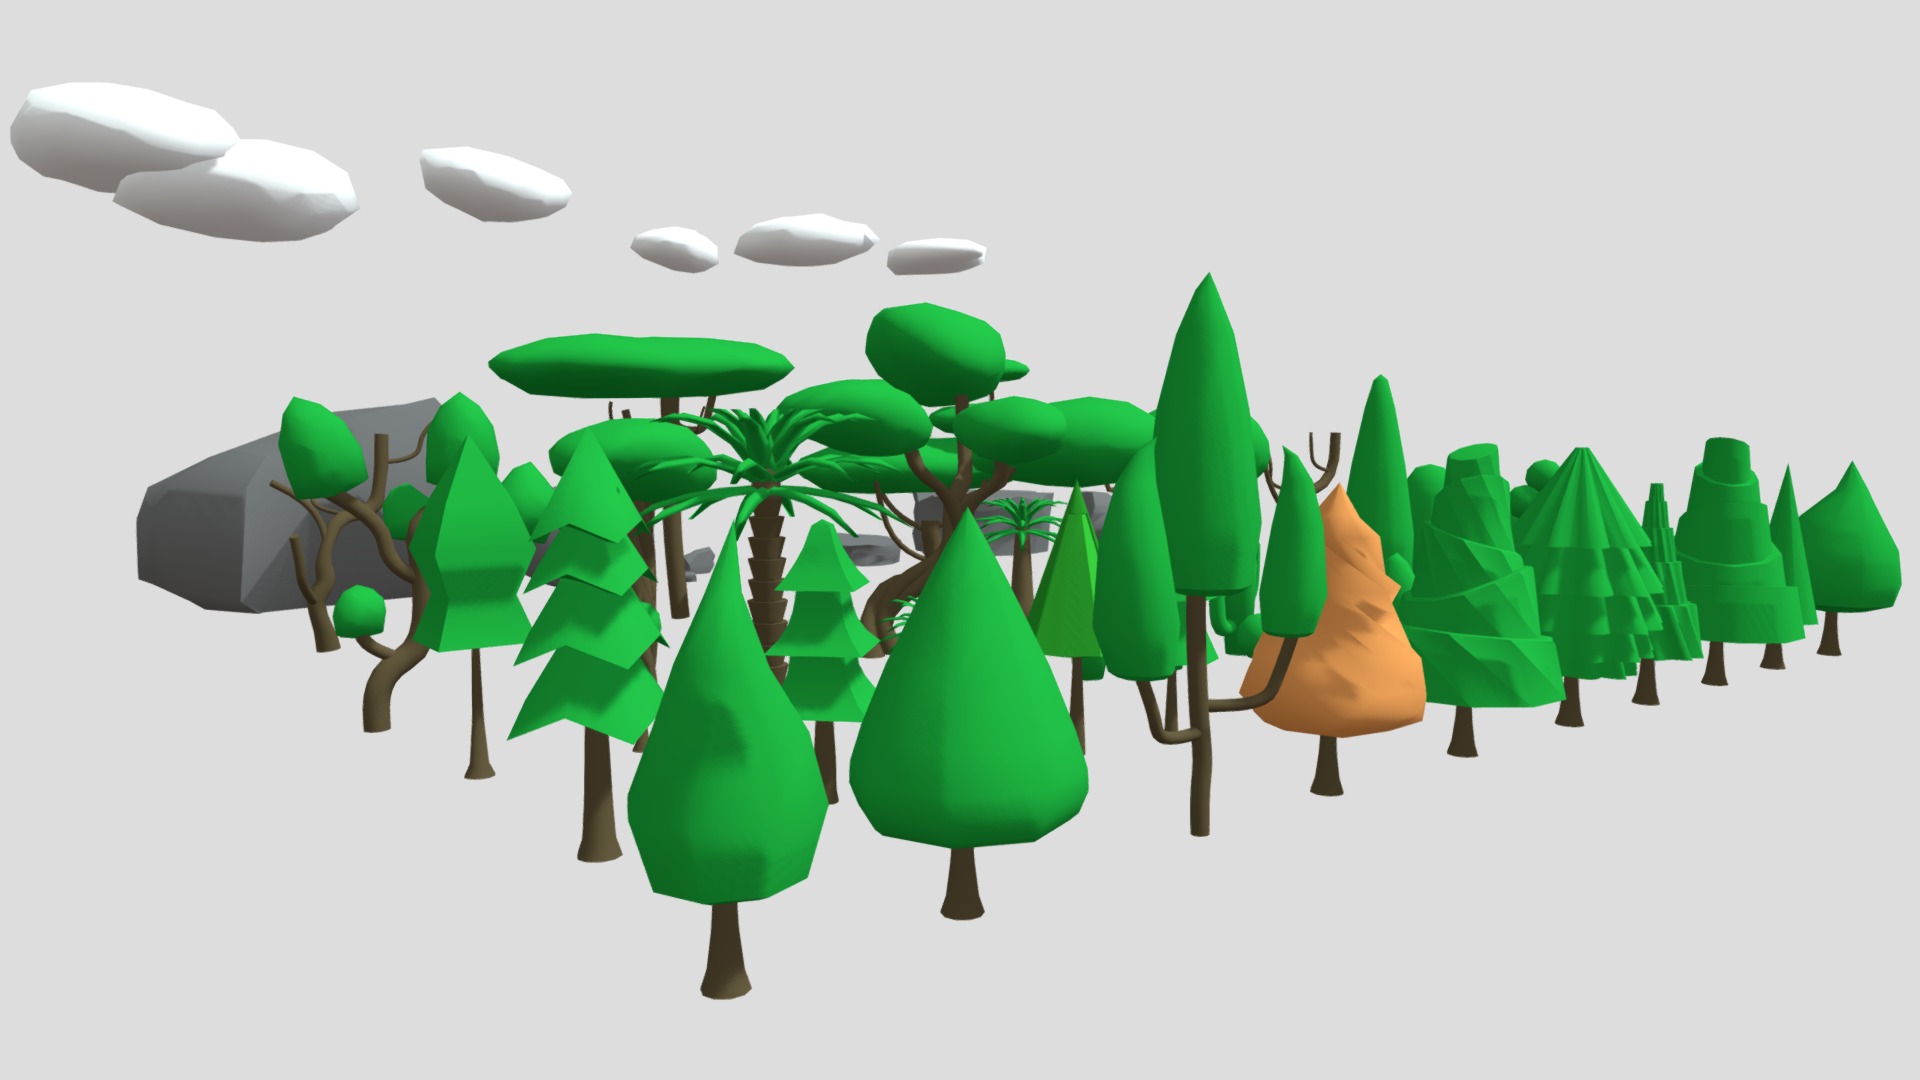 3D model Carton Trees 3ds Max - This is a 3D model of the Carton Trees 3ds Max. The 3D model is about a group of trees.